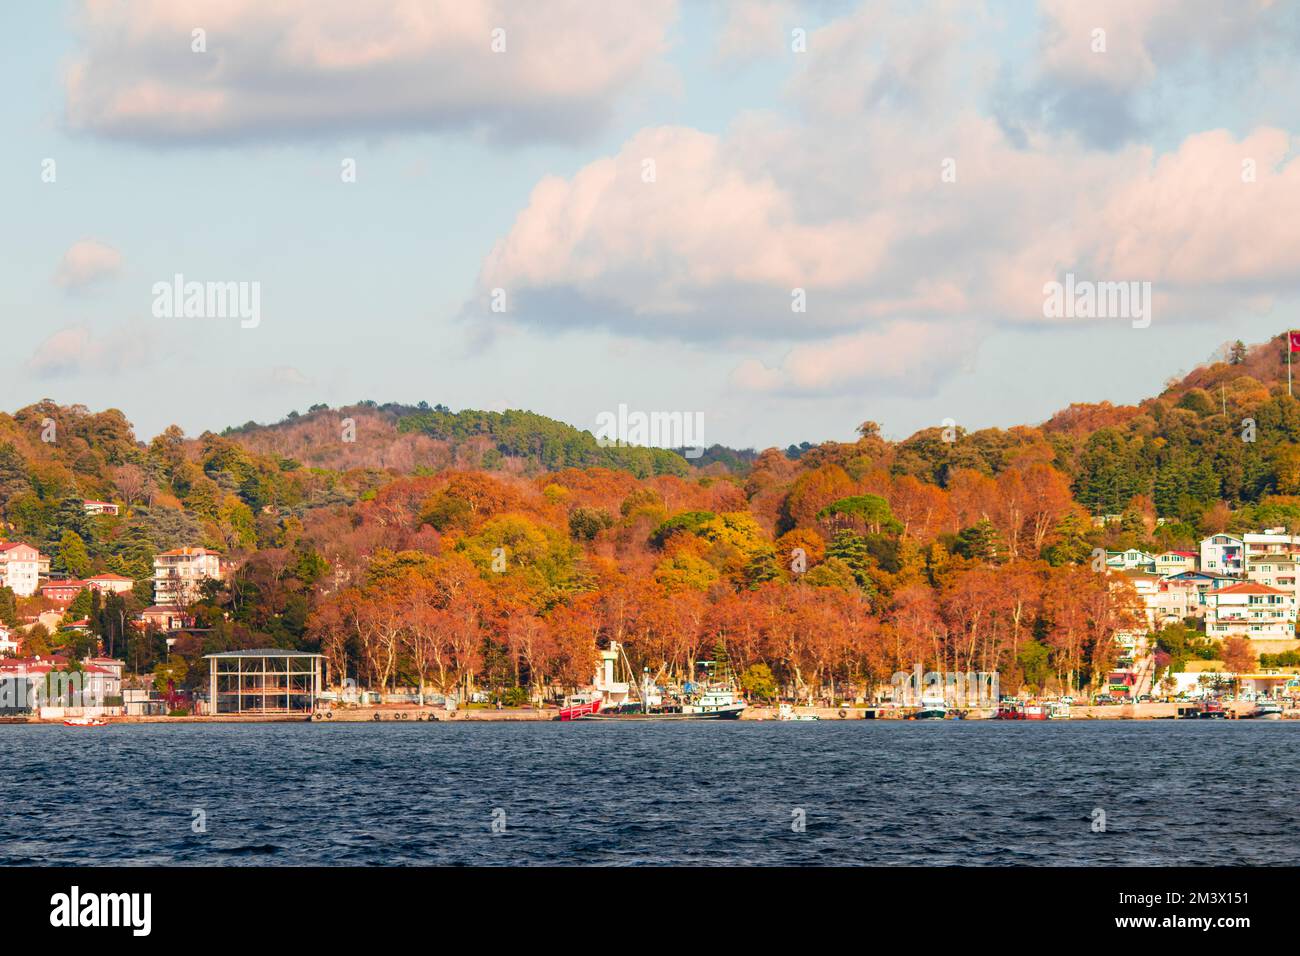 View of Beykoz beach from the sea. Trees clad in autumn colors in Beykoz. Cloudy blue sky. Landscape. No people, nobody. Horizontal photo. Stock Photo